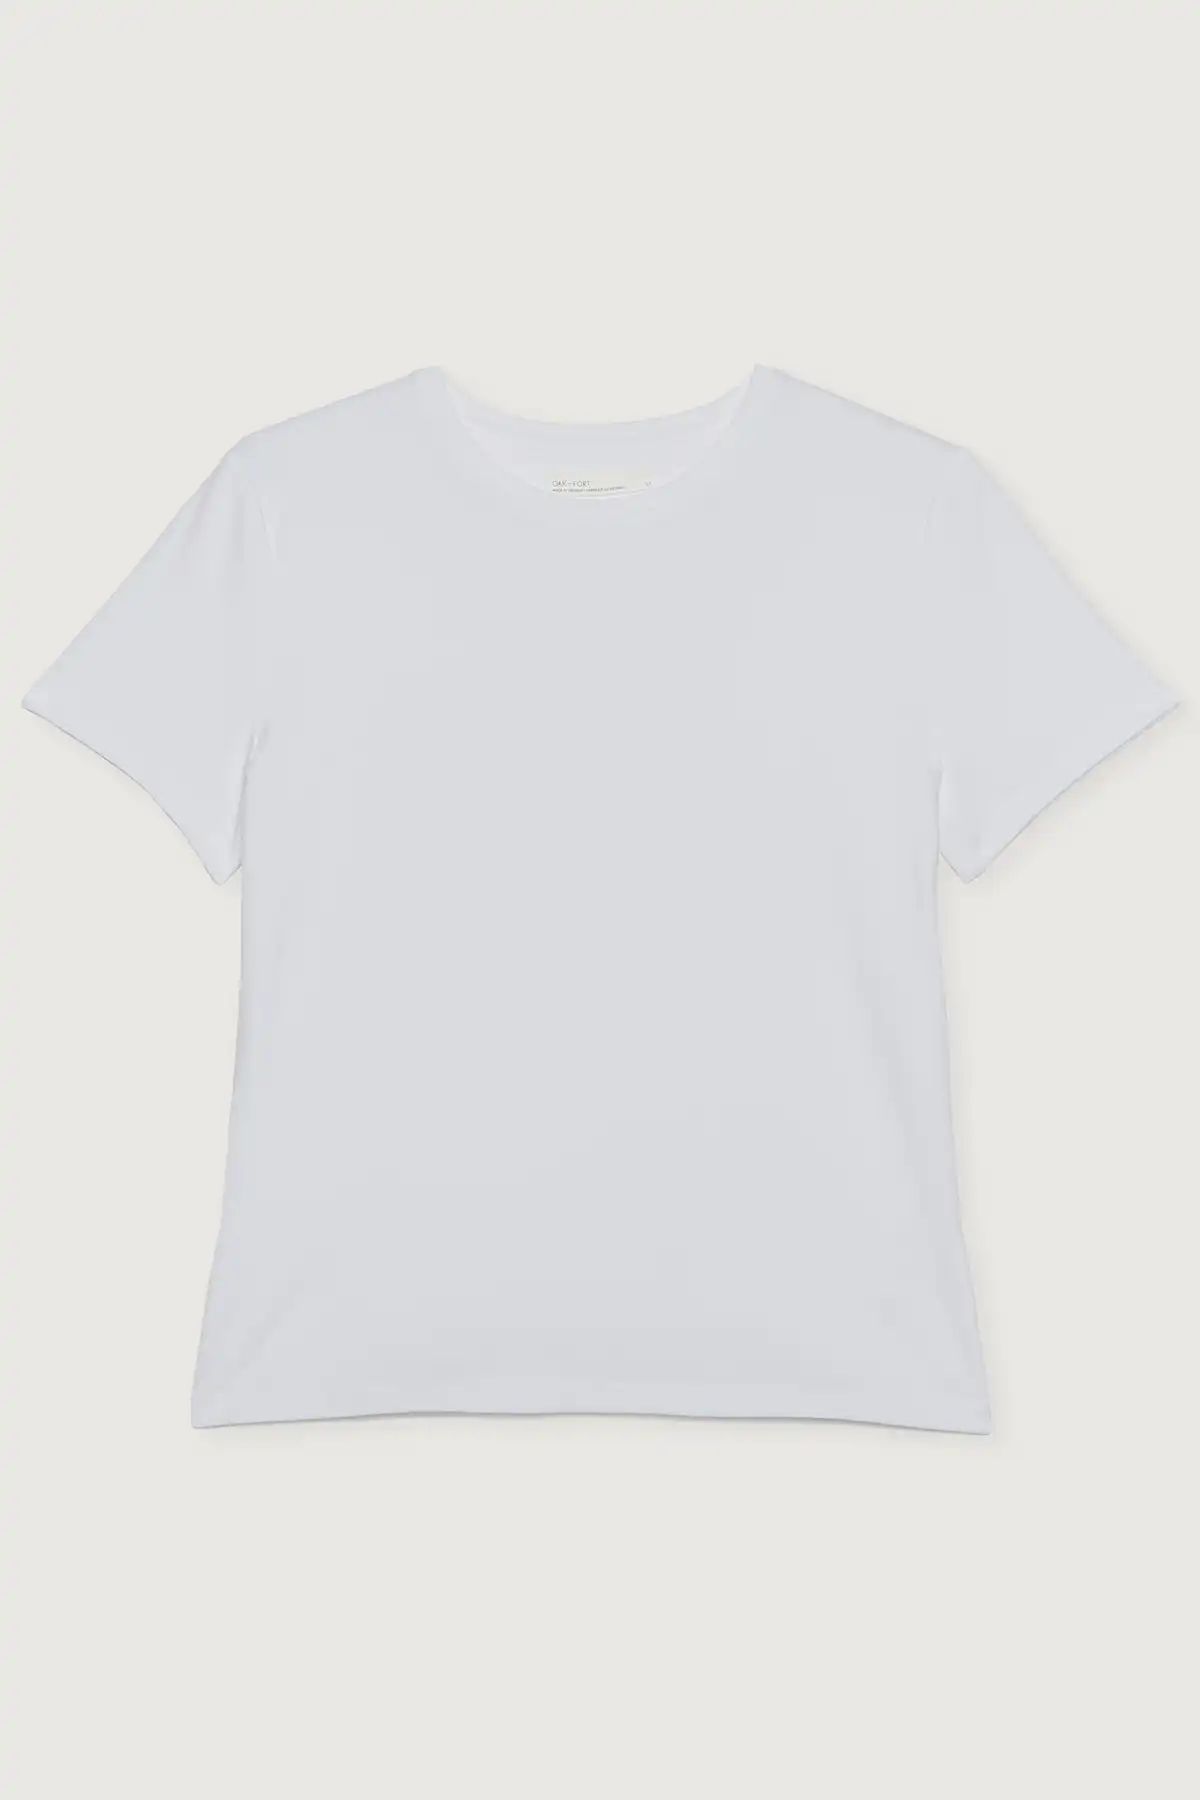 CLASSIC FIT T-SHIRT        4.5 star rating   6 Reviews          $34    
 CT-9832-W  White  Black;... | OAK + FORT